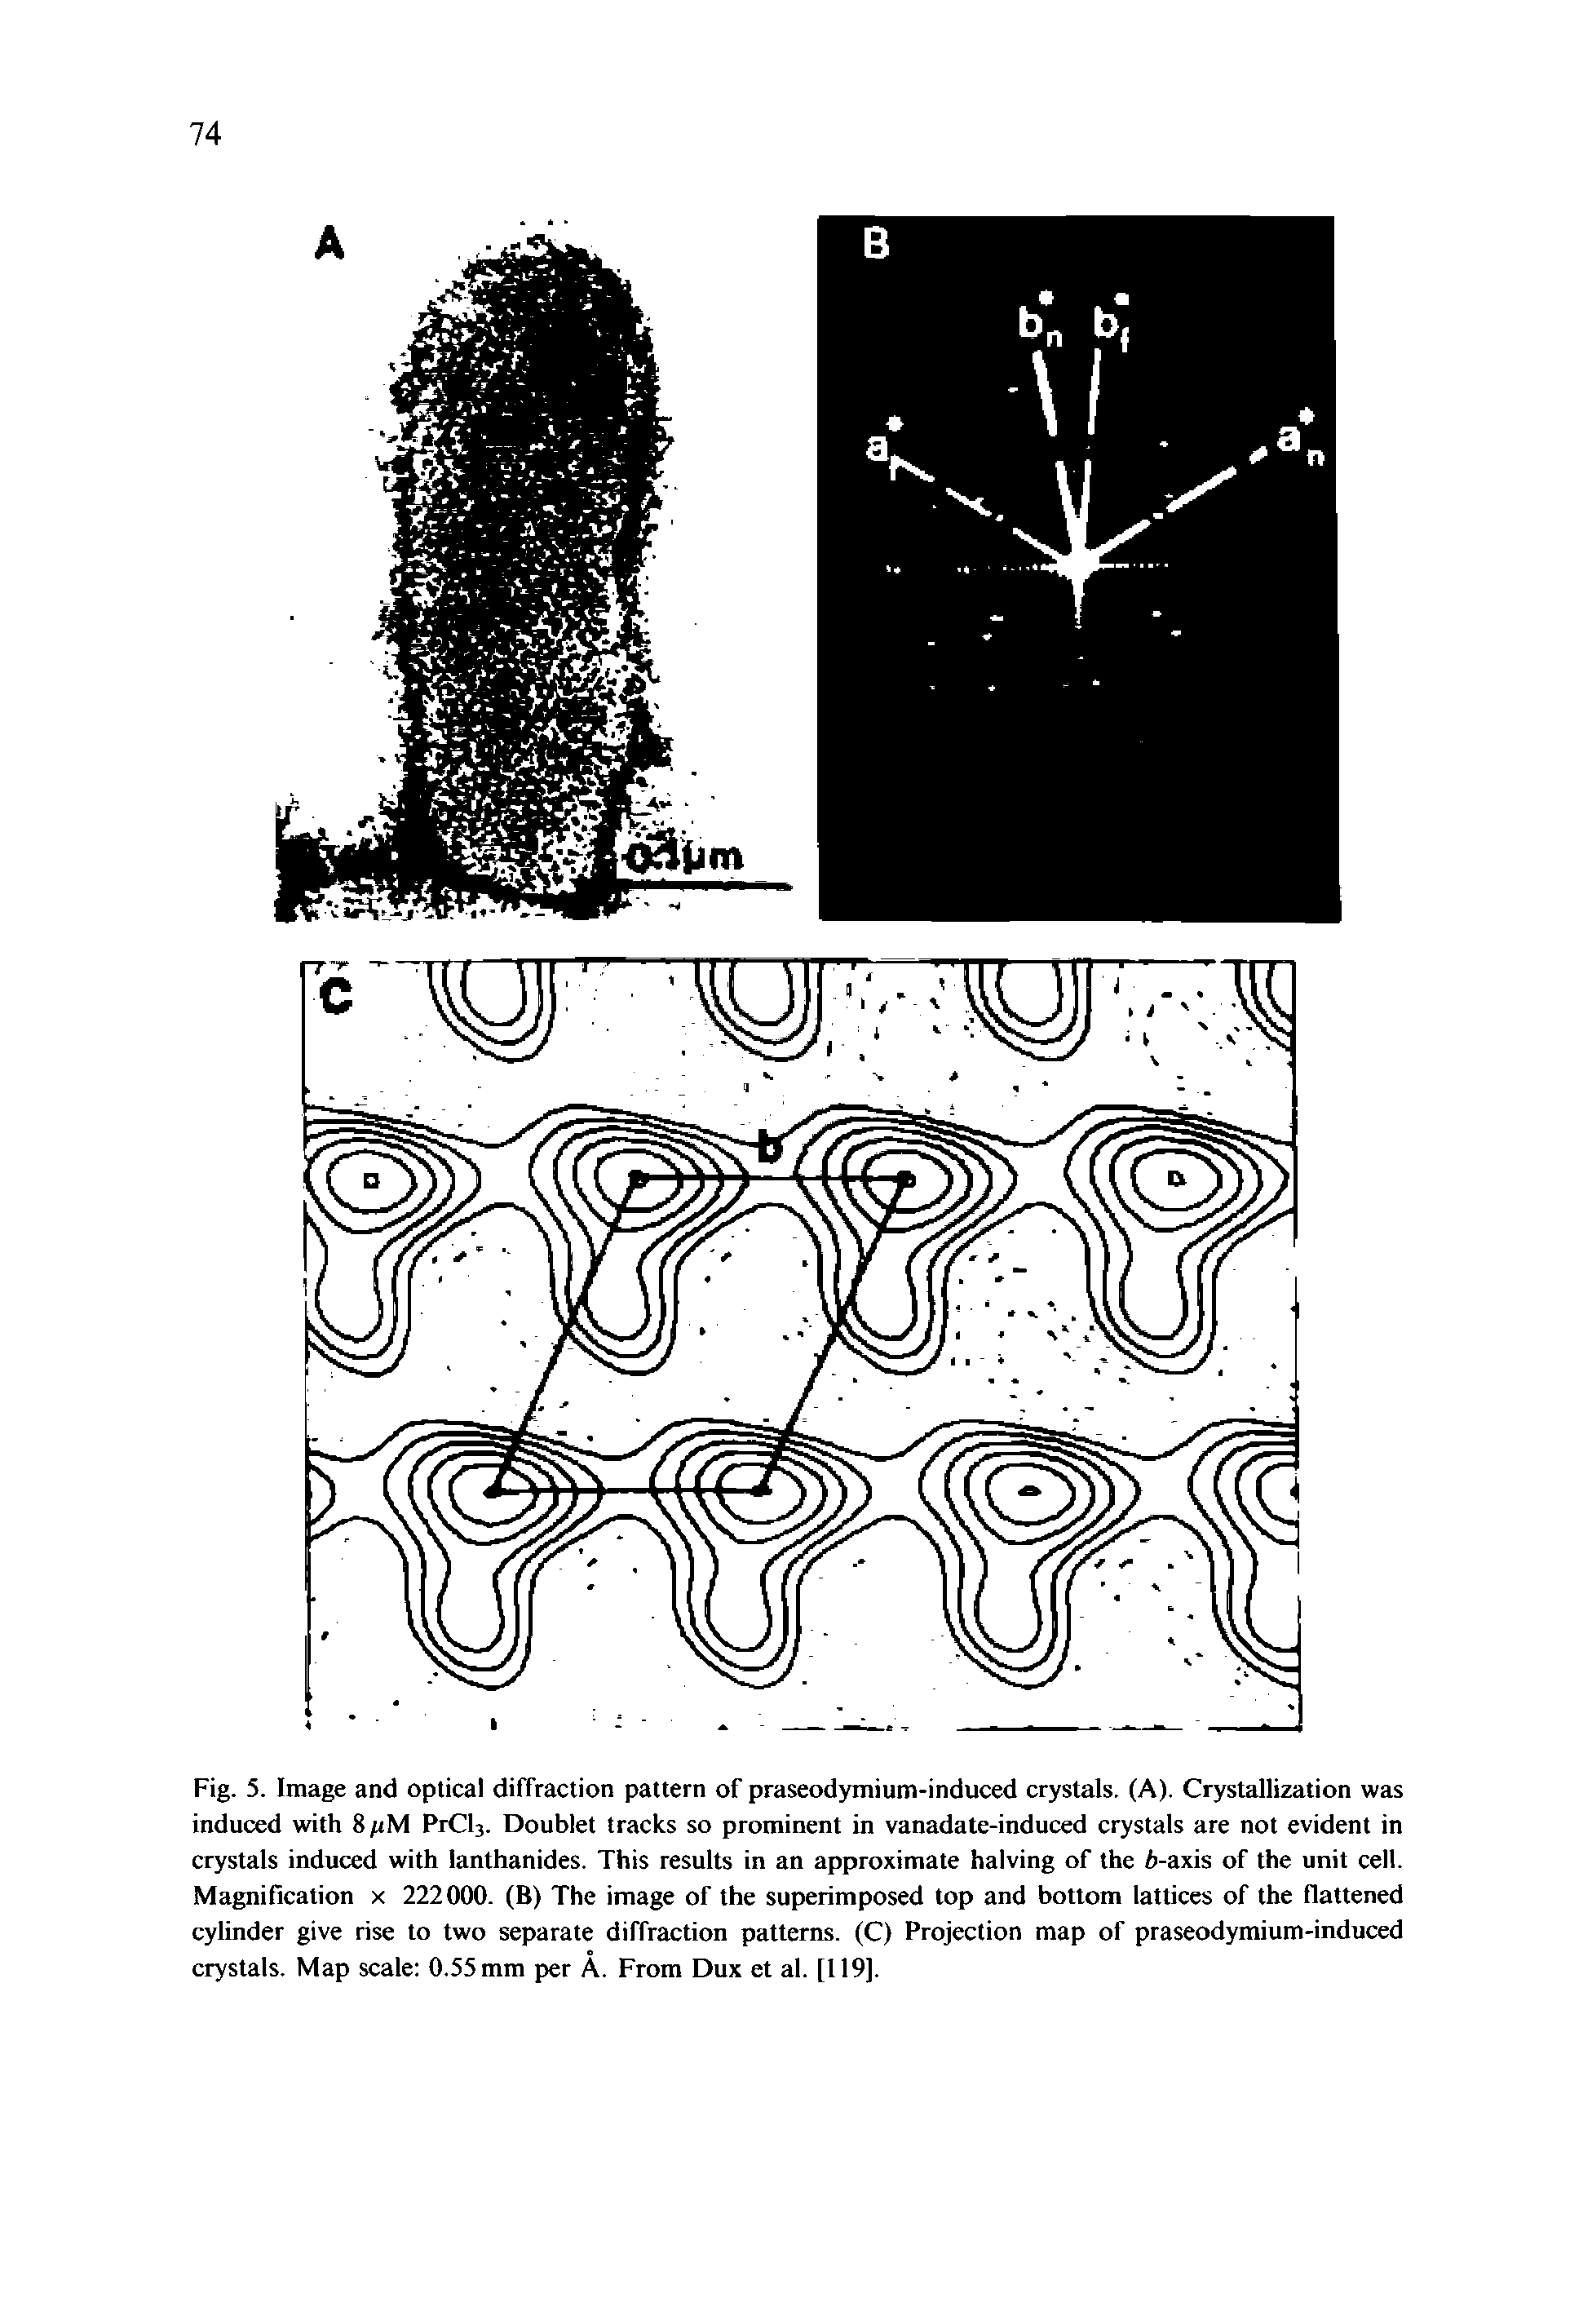 Fig. 5. Image and optical diffraction pattern of praseodymium-induced crystals, (A). Crystallization was induced with 8 PrCU. Doublet tracks so prominent in vanadate-induced crystals are not evident in crystals induced with lanthanides. This results in an approximate halving of the A-axis of the unit cell. Magnification x 222000. (B) The image of the superimposed top and bottom lattices of the flattened cylinder give rise to two separate diffraction patterns. (C) Projection map of praseodymium-induced crystals. Map scale 0.55 mm per A. From Dux et al. [119].